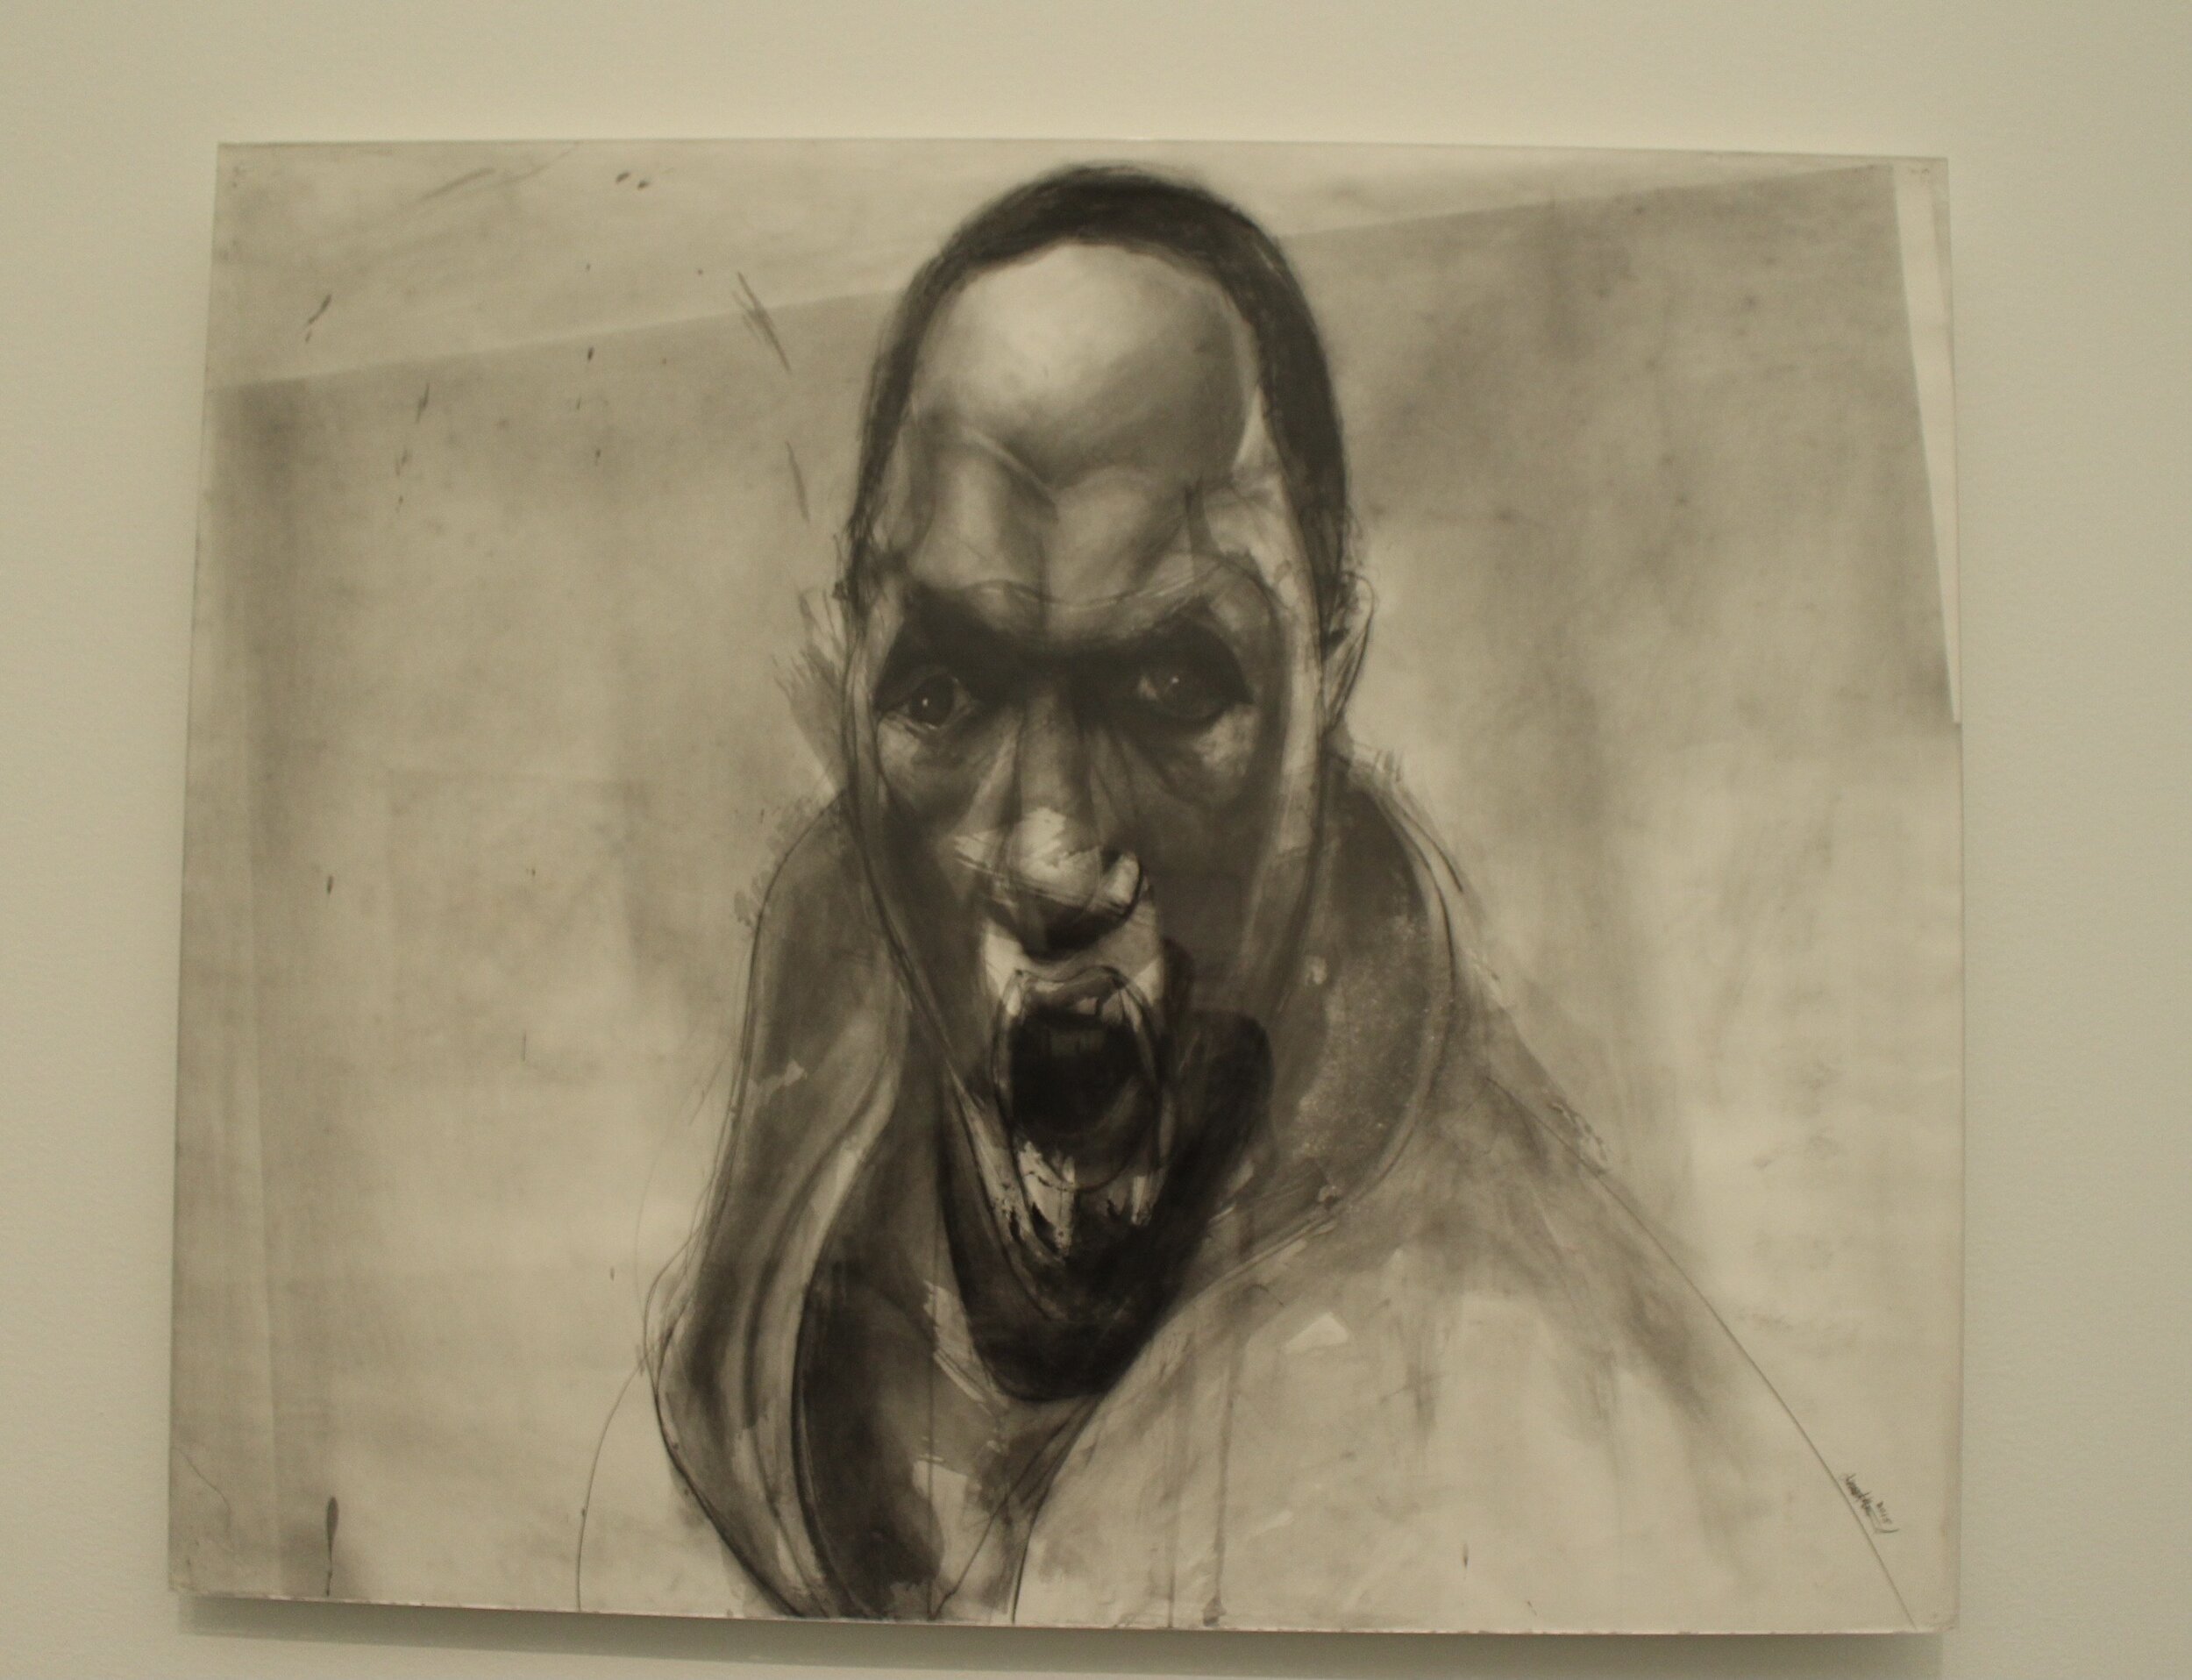  The second half of Jesse Howard's Rage South Carolina Series.The photo was taken by Sabrina Hart on April 3, 2021 at the Museum of Contemporary Art Chicago.    